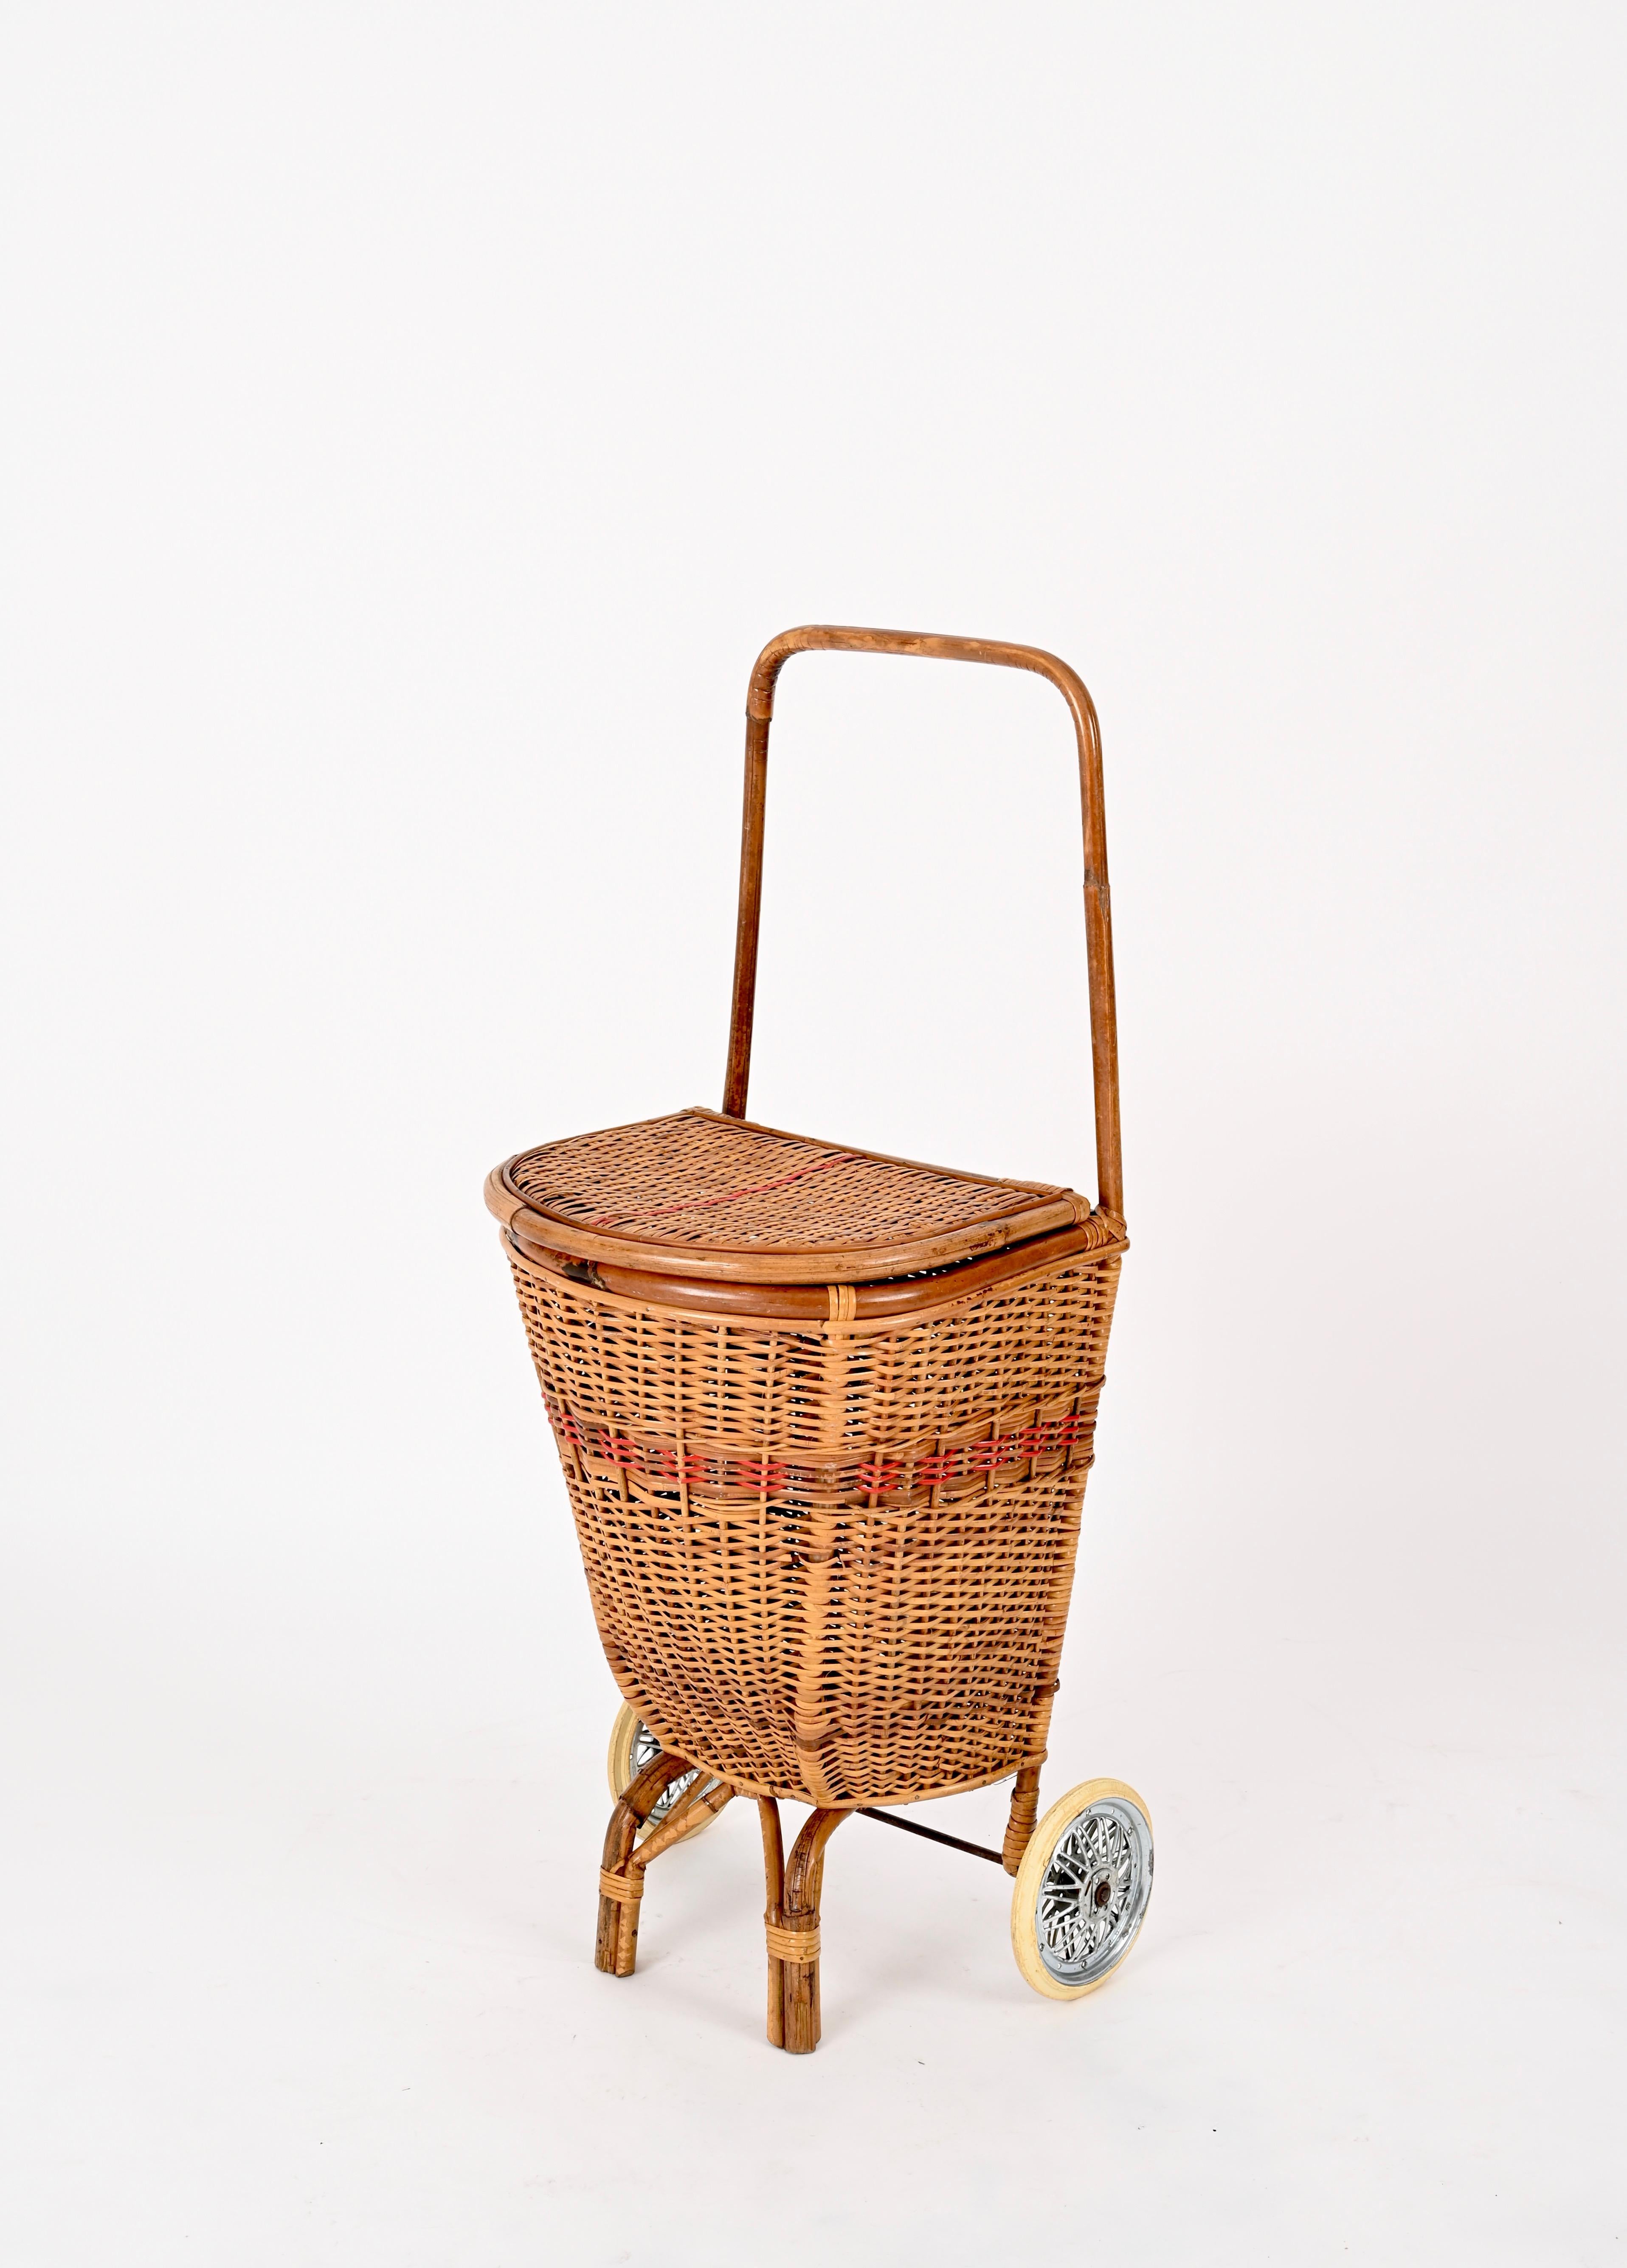 Marvelous Mid-Century shopping trolley fully made in curved rattan and hand-woven wicker. This rare French Riviera style market cart was made in Italy during the 1960s. 

This beautiful and unique decorative object is fully hand-made with perfect